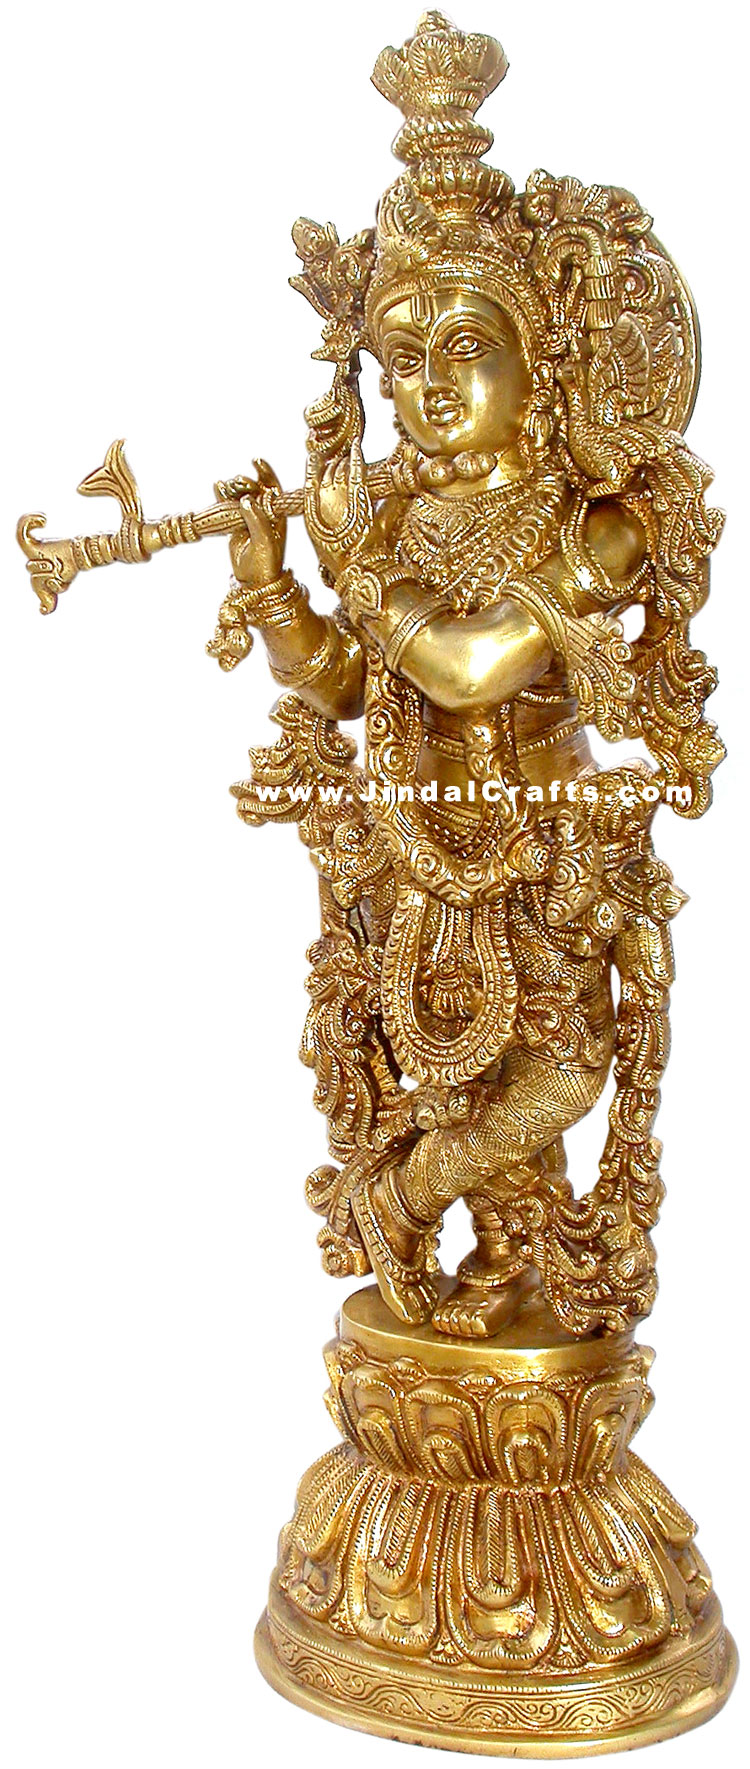 Lord Krishna Exclusive Piece of Brass Religious Statue Figurine Idol Collectible